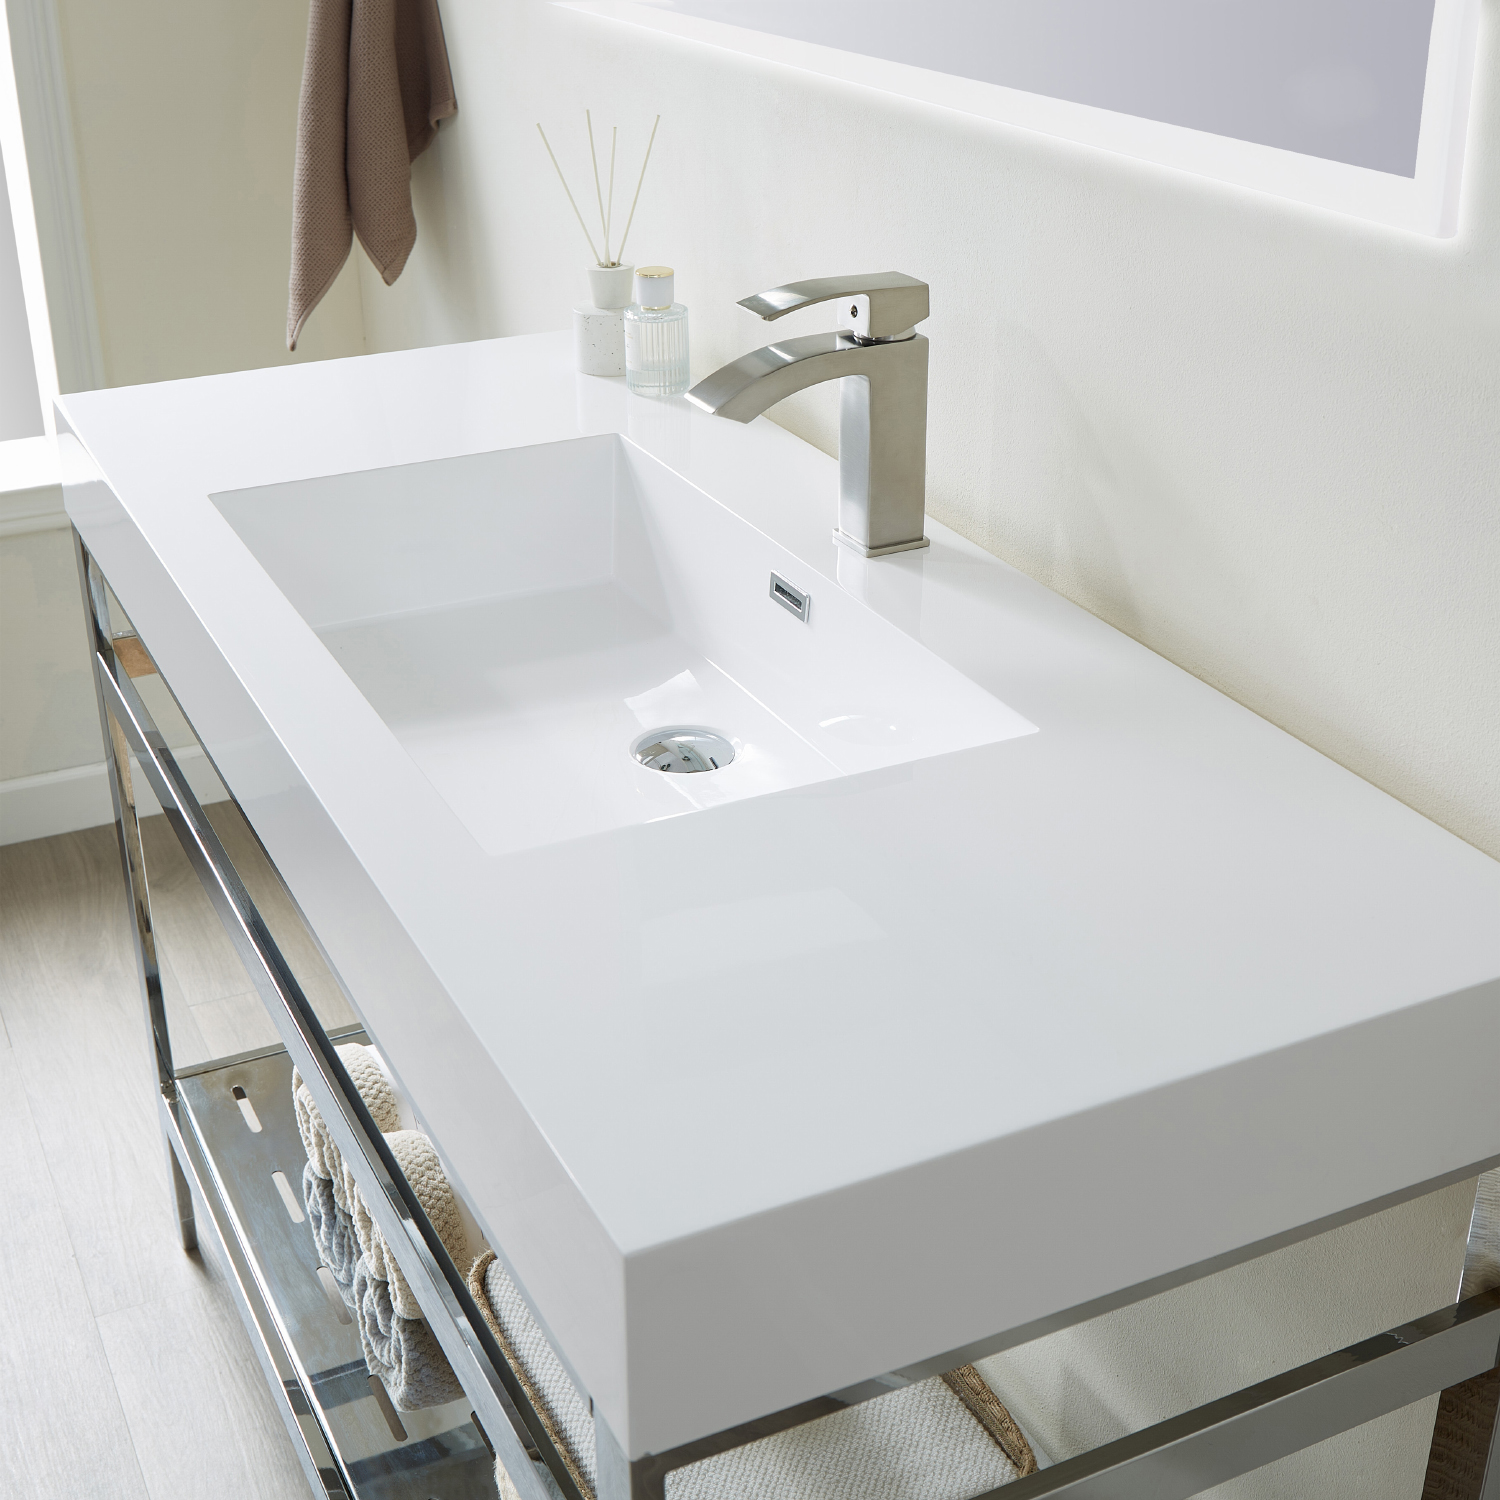 48" Single Sink Bath Vanity in Polish Chrome Metal Support with White One-Piece Composite Stone Sink Top